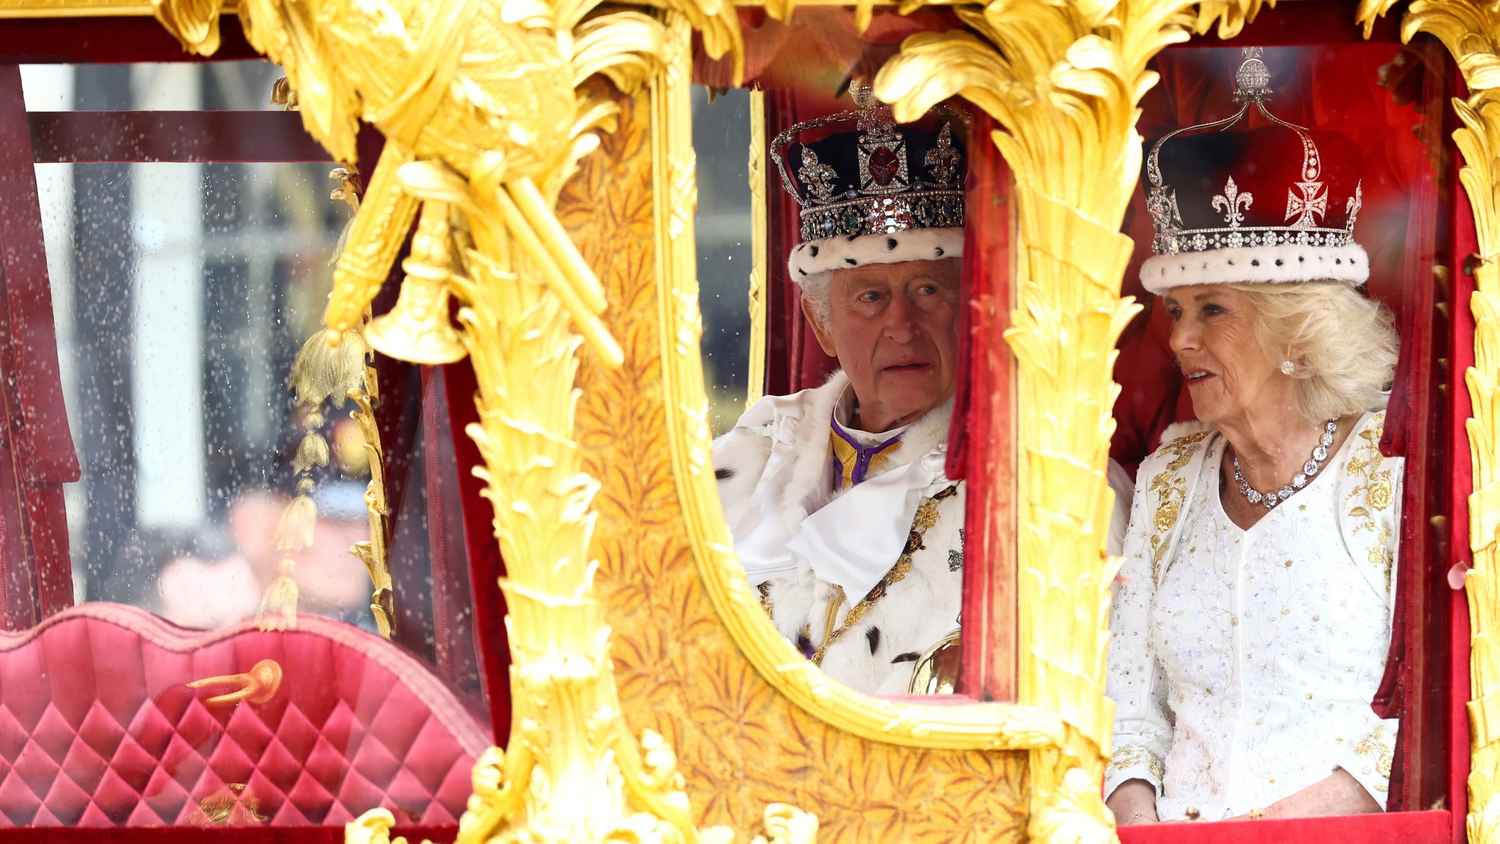 The Coronation of HM King Charles III and Queen Camilla